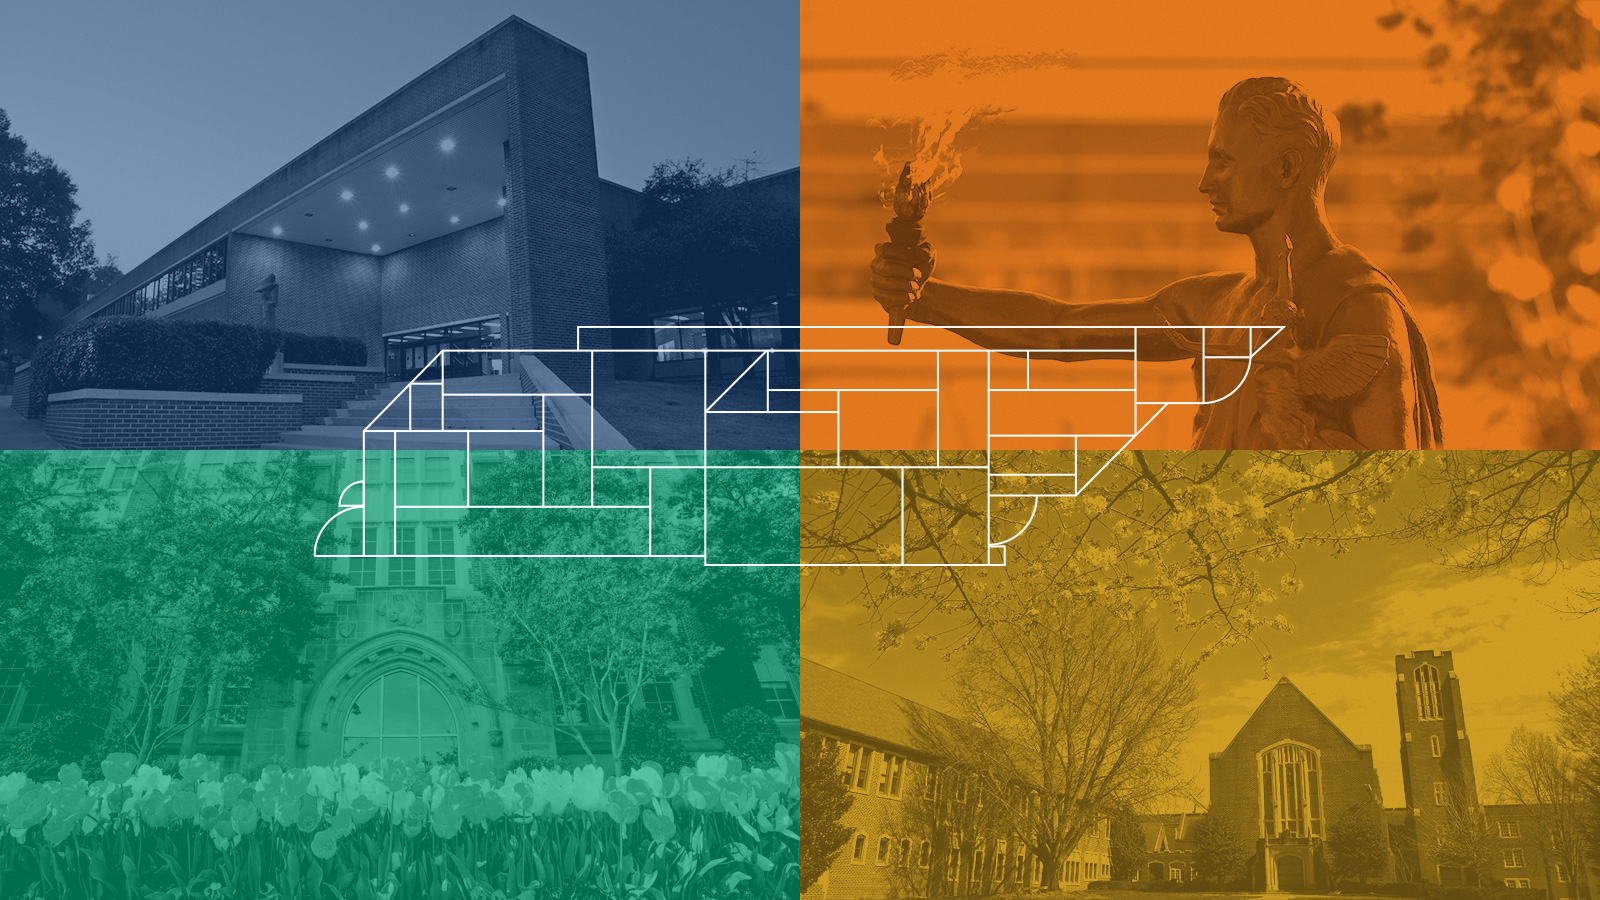 UT's 4 primary campuses in Memphis, Martin, Chattanooga and Knoxville